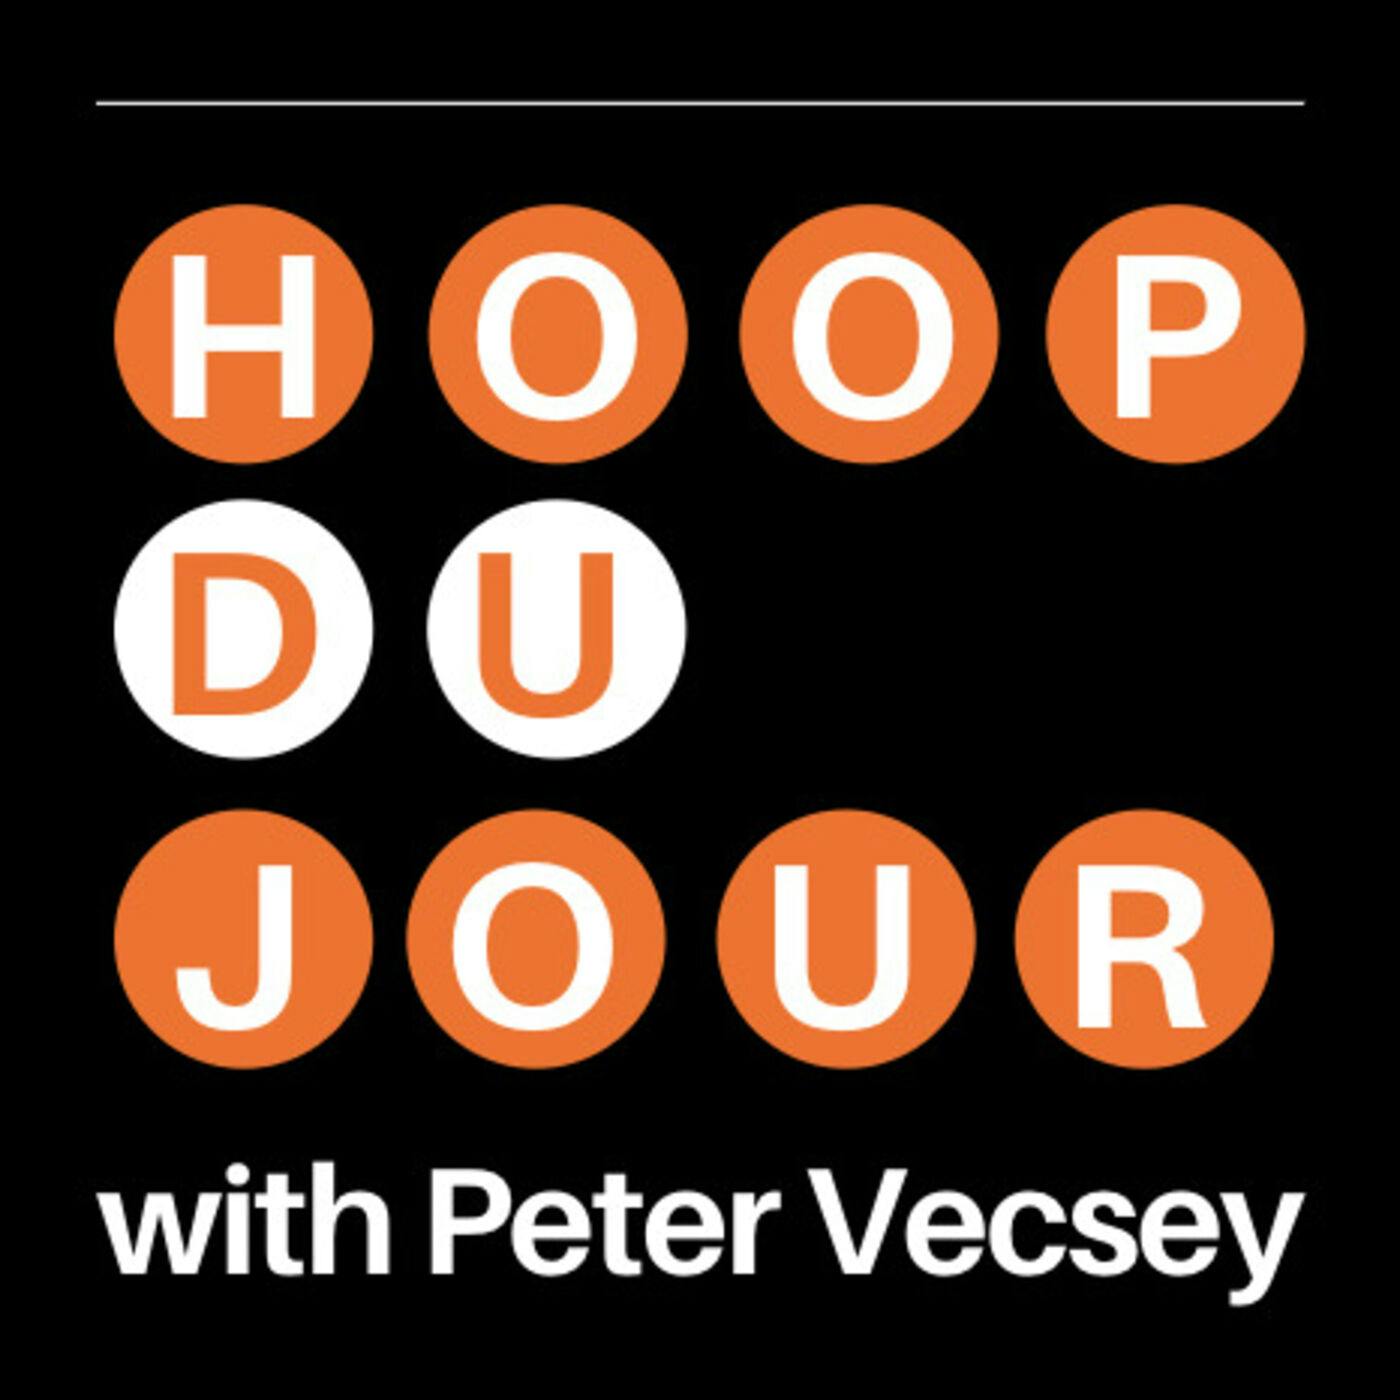 Hoop du Jour with Peter Vecsey - MICHEAL RAY RICHARDSON